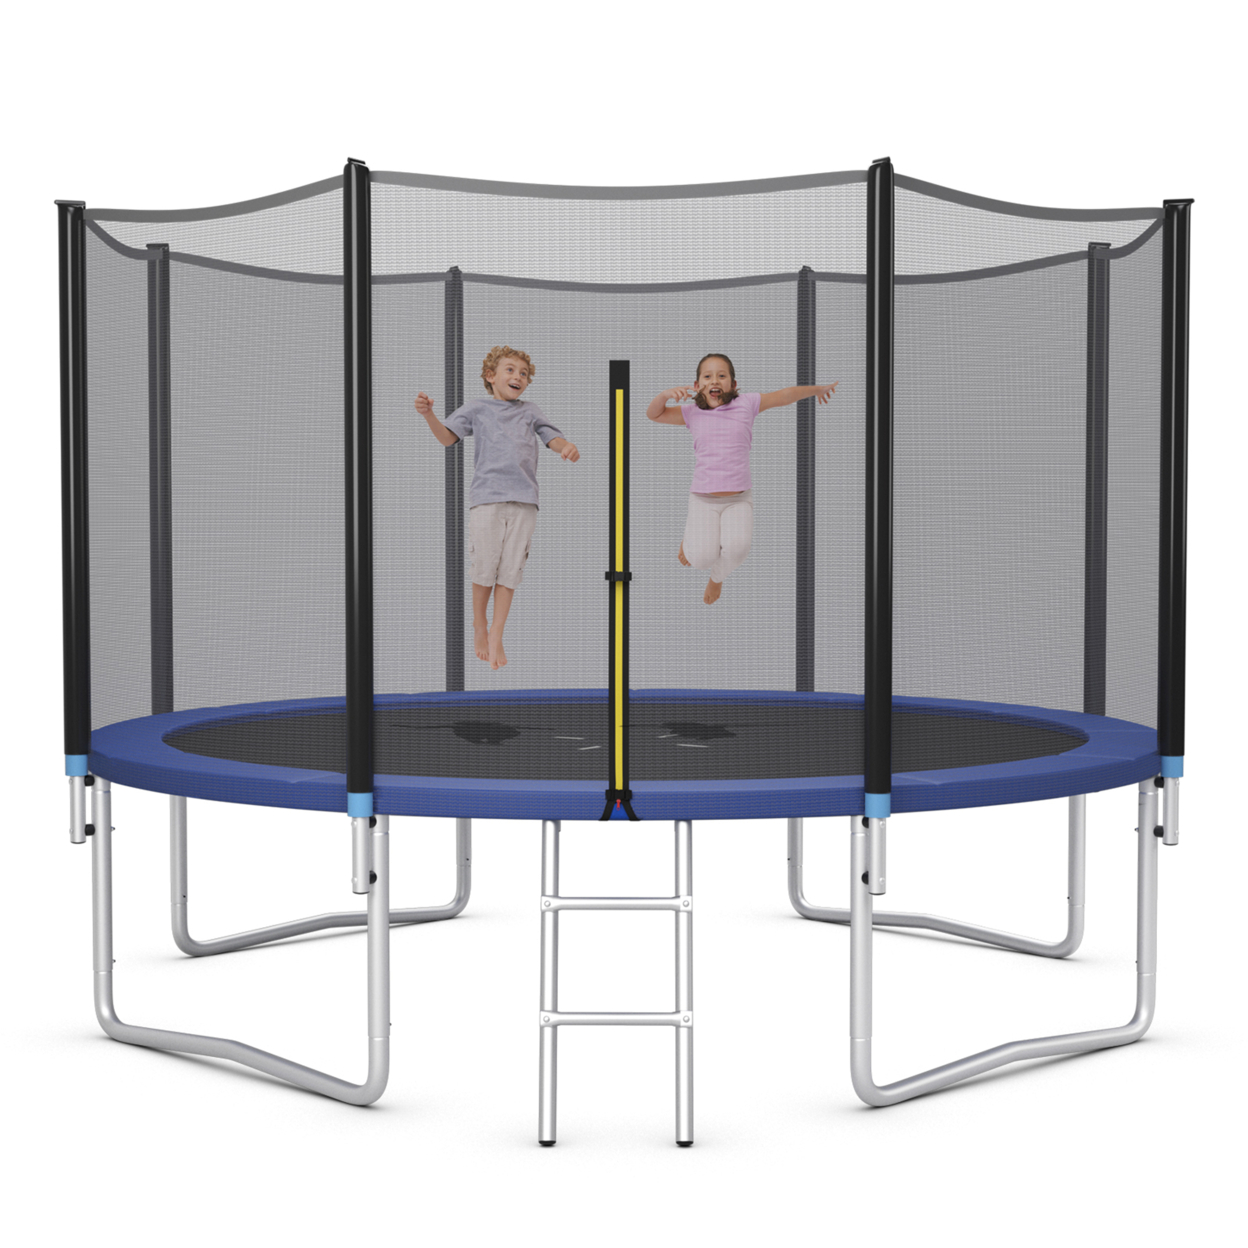 8/10/12/14/15/16 FT Outdoor Trampoline Bounce Combo W/Safety Closure Net Ladder - Black, 12 Ft